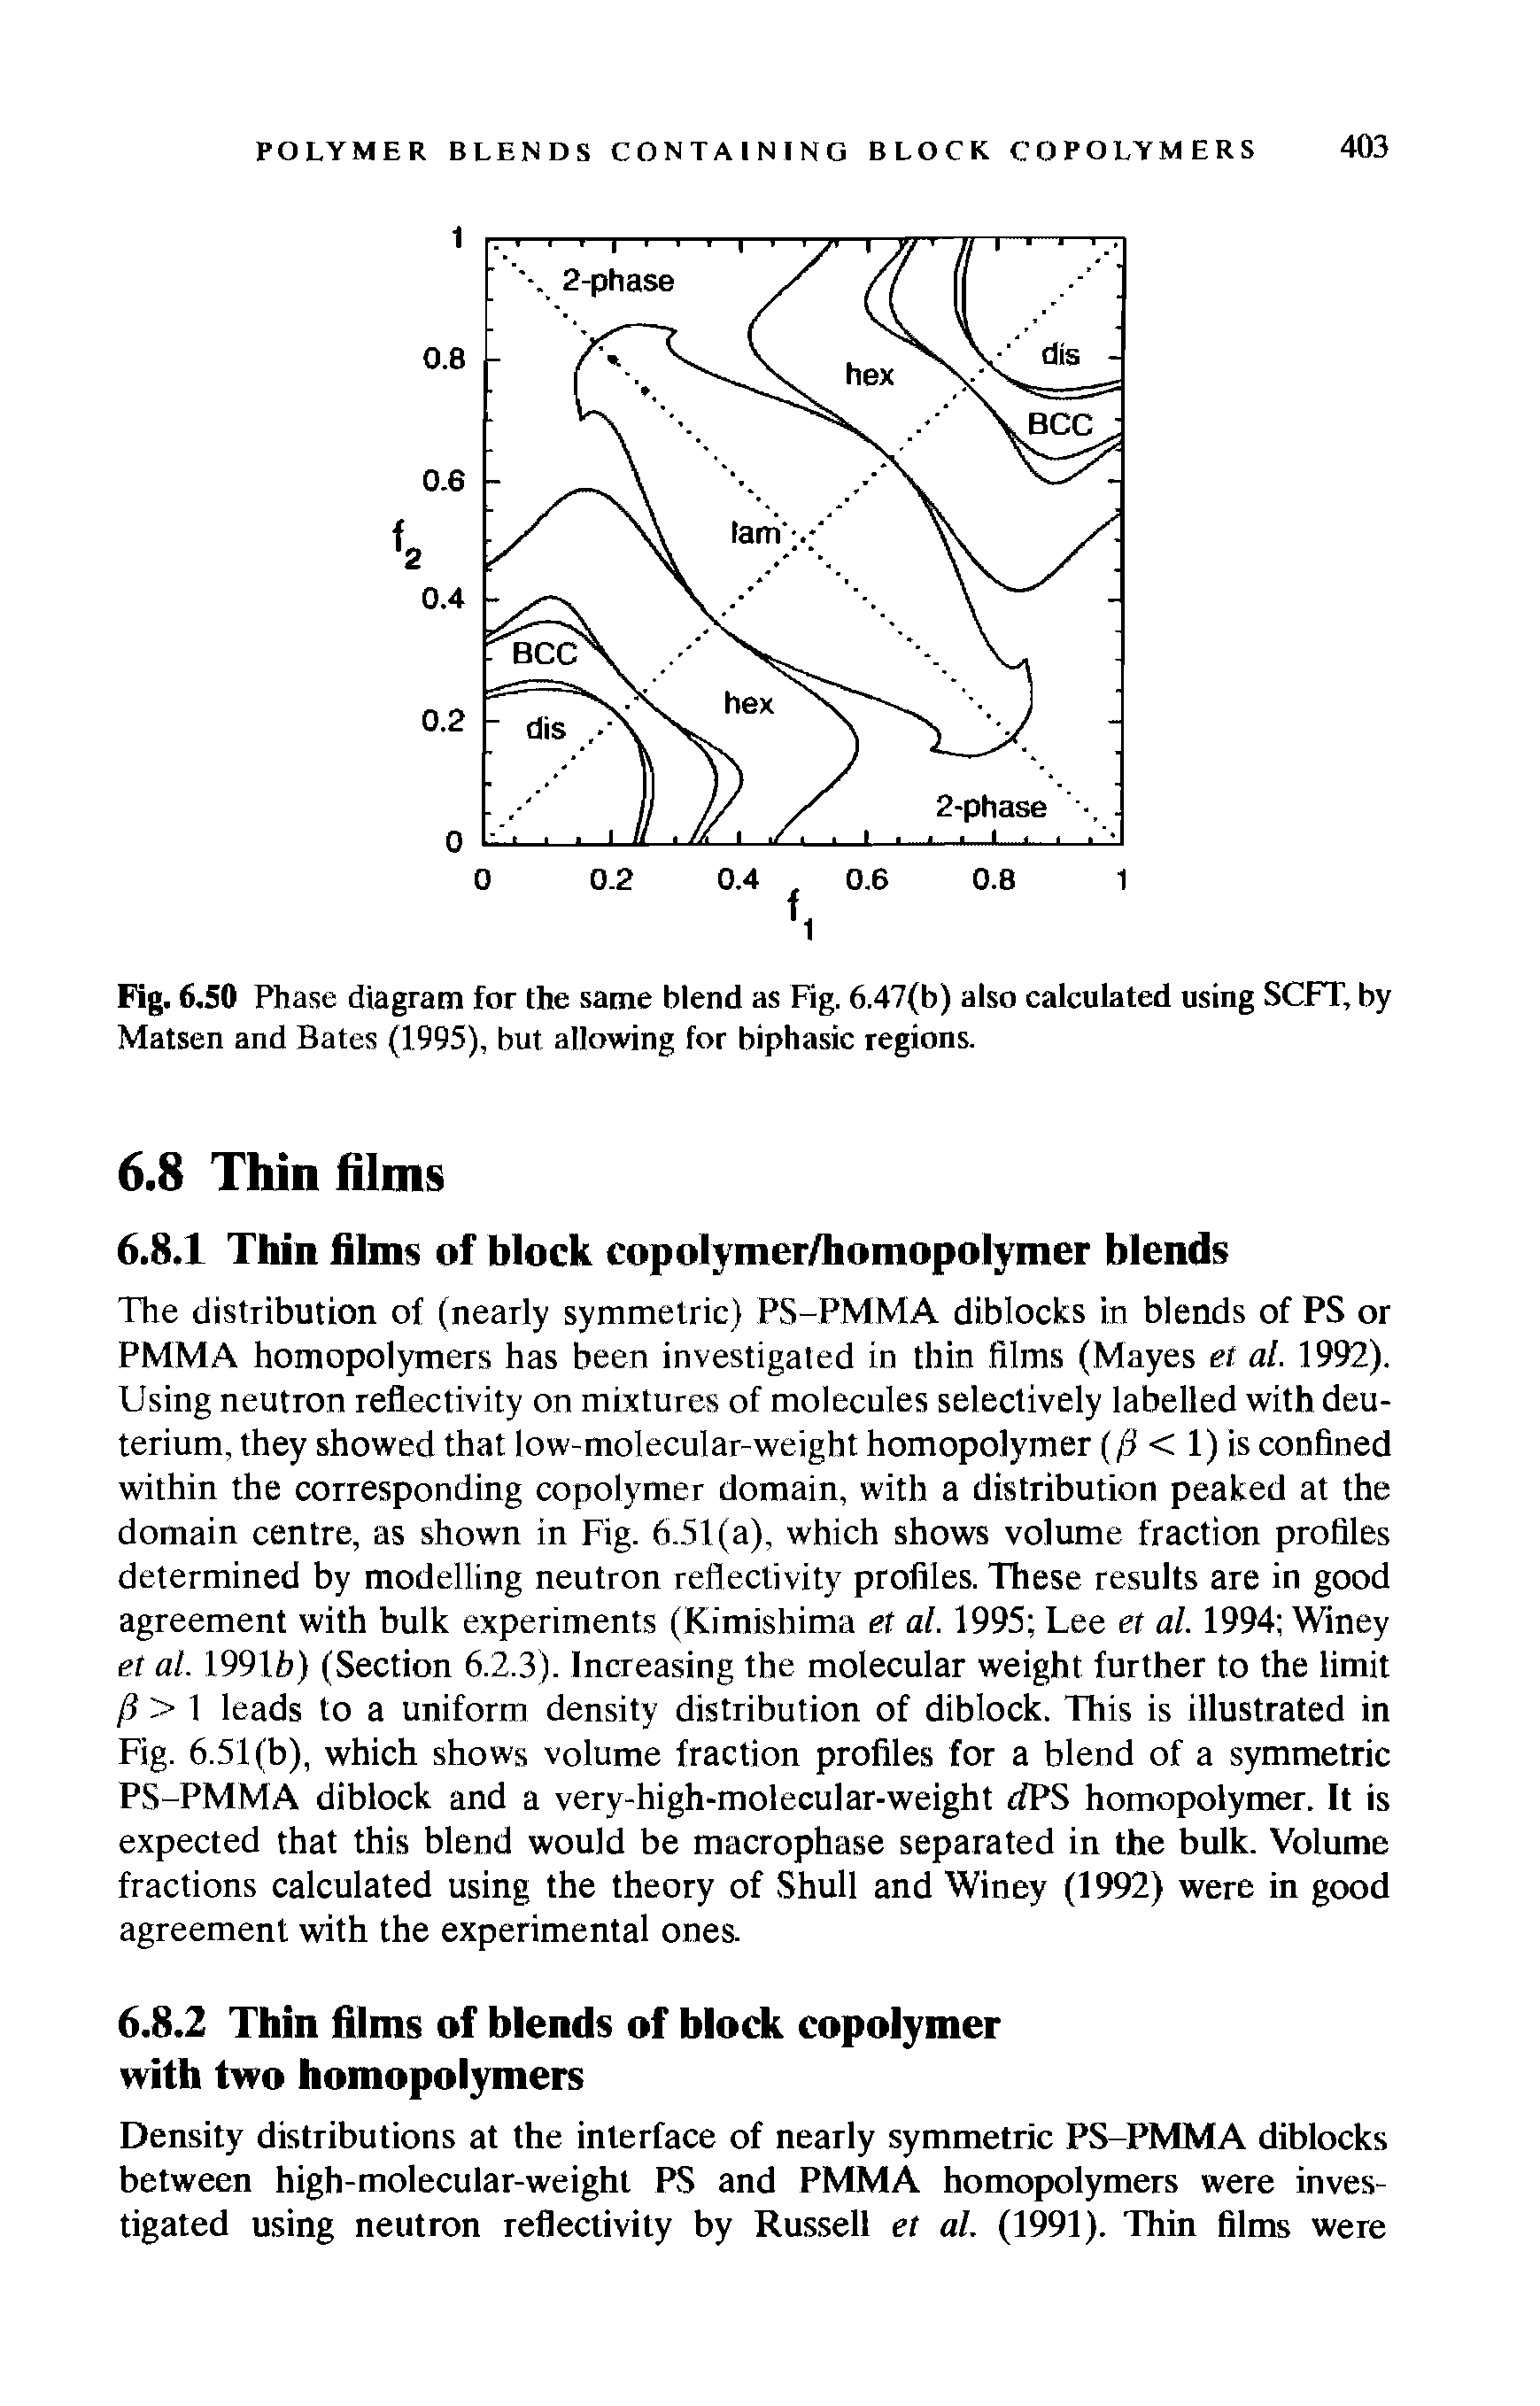 Fig. 6.50 Phase diagram for the same blend as Fig. 6.47(b) also calculated using SCFT, by Matsen and Bates (1995), but allowing for biphasic regions.